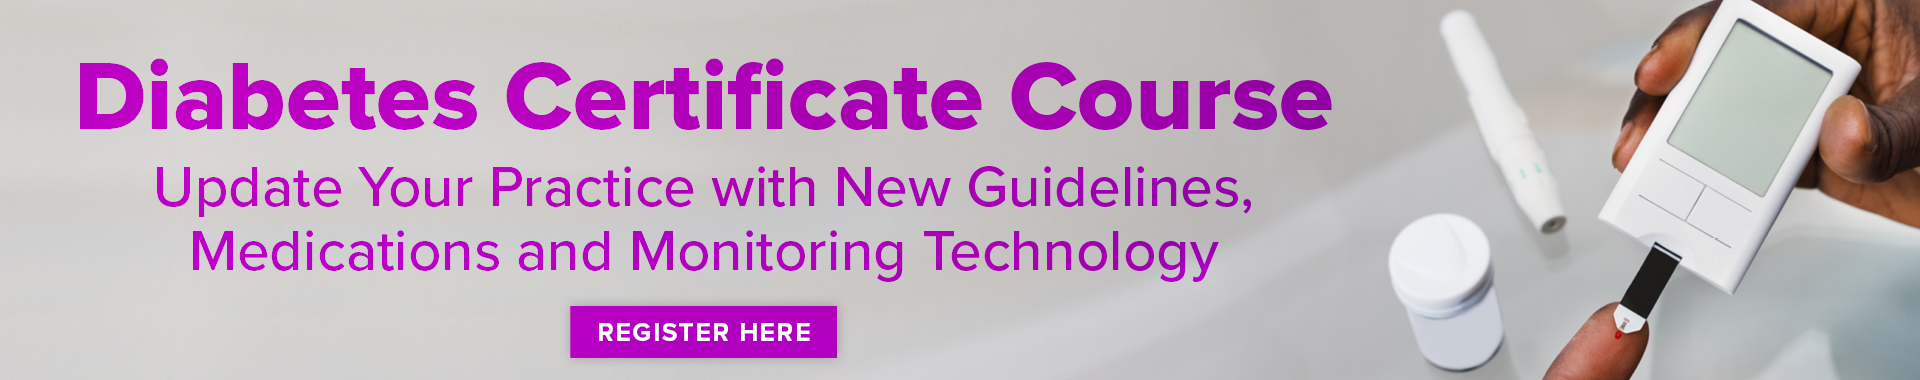 Diabetes Certificate Course: Update Your Practice with New Guidelines, Medications and Monitoring Technology